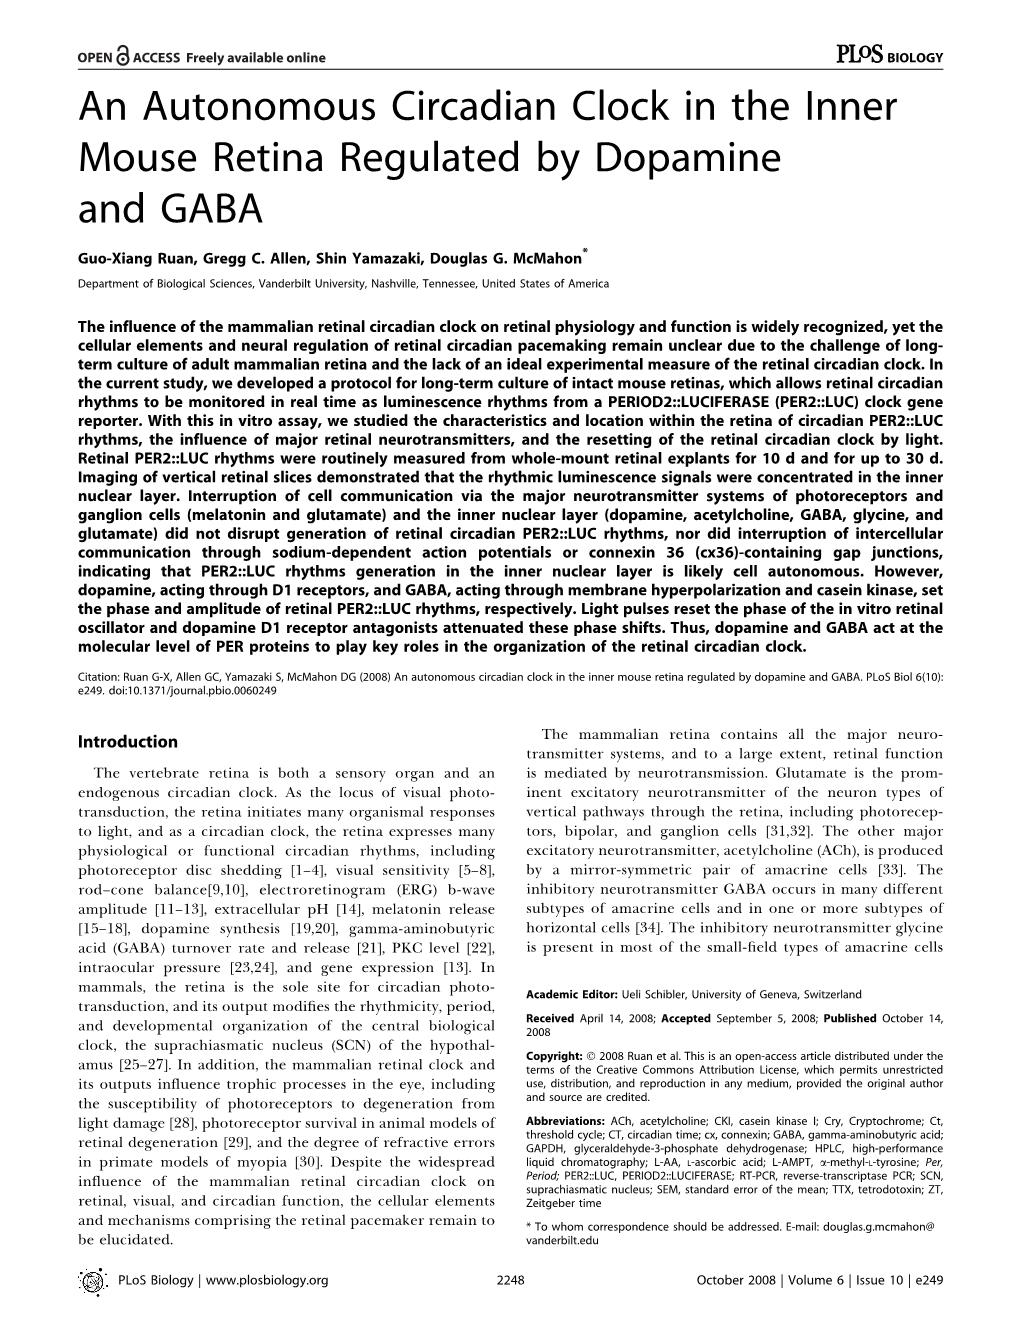 An Autonomous Circadian Clock in the Inner Mouse Retina Regulated by Dopamine and GABA